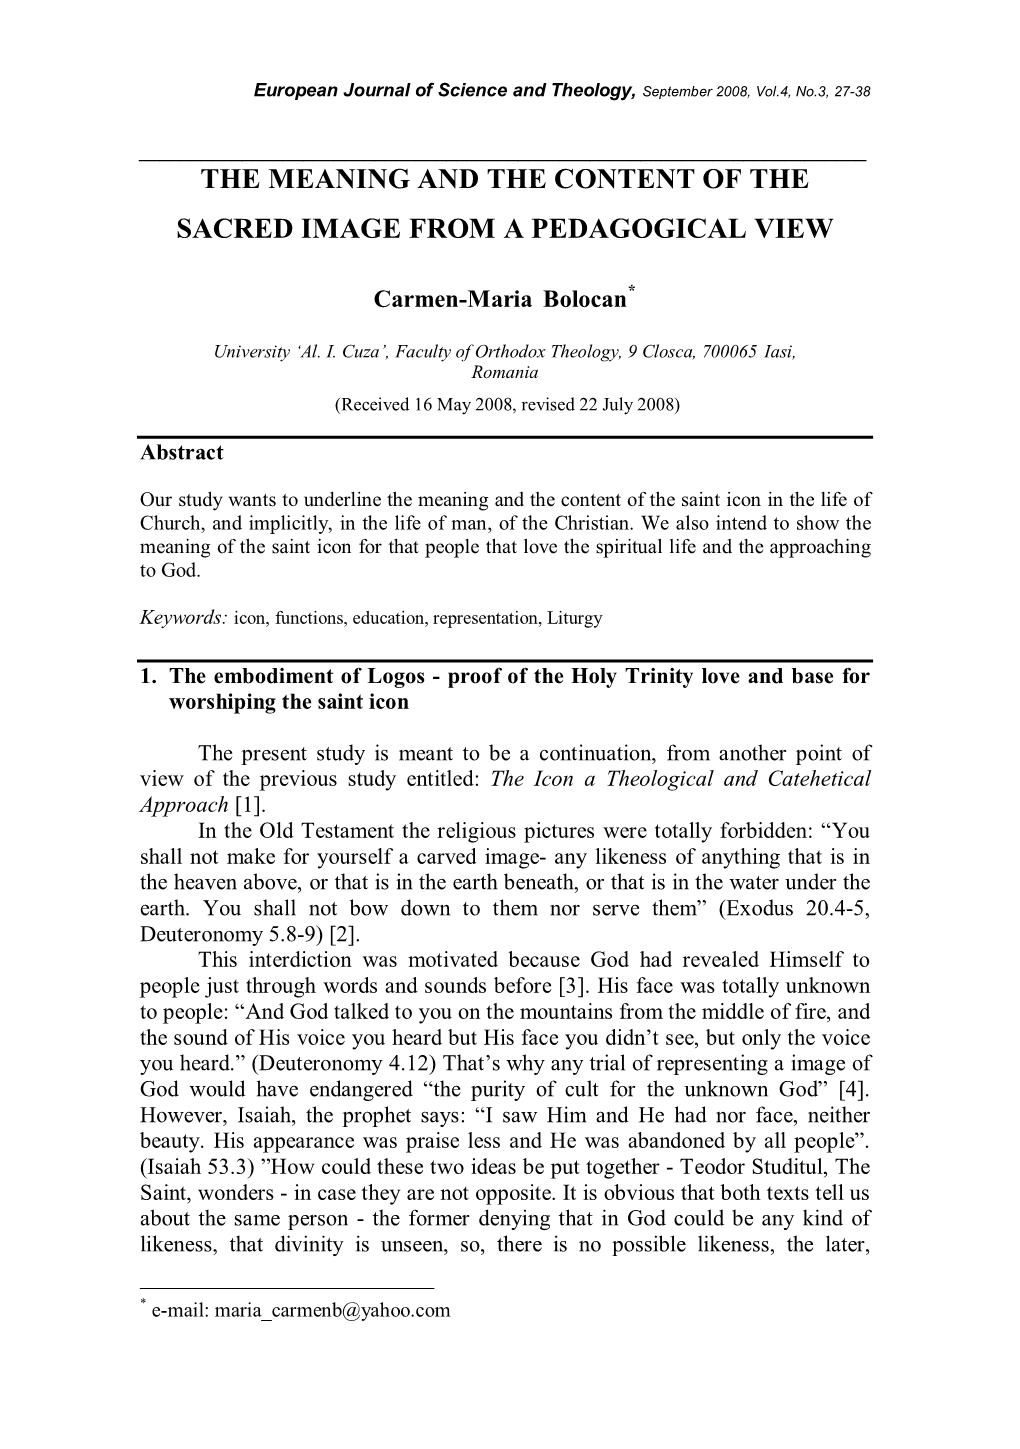 The Meaning and the Content of the Sacred Image from a Pedagogical View